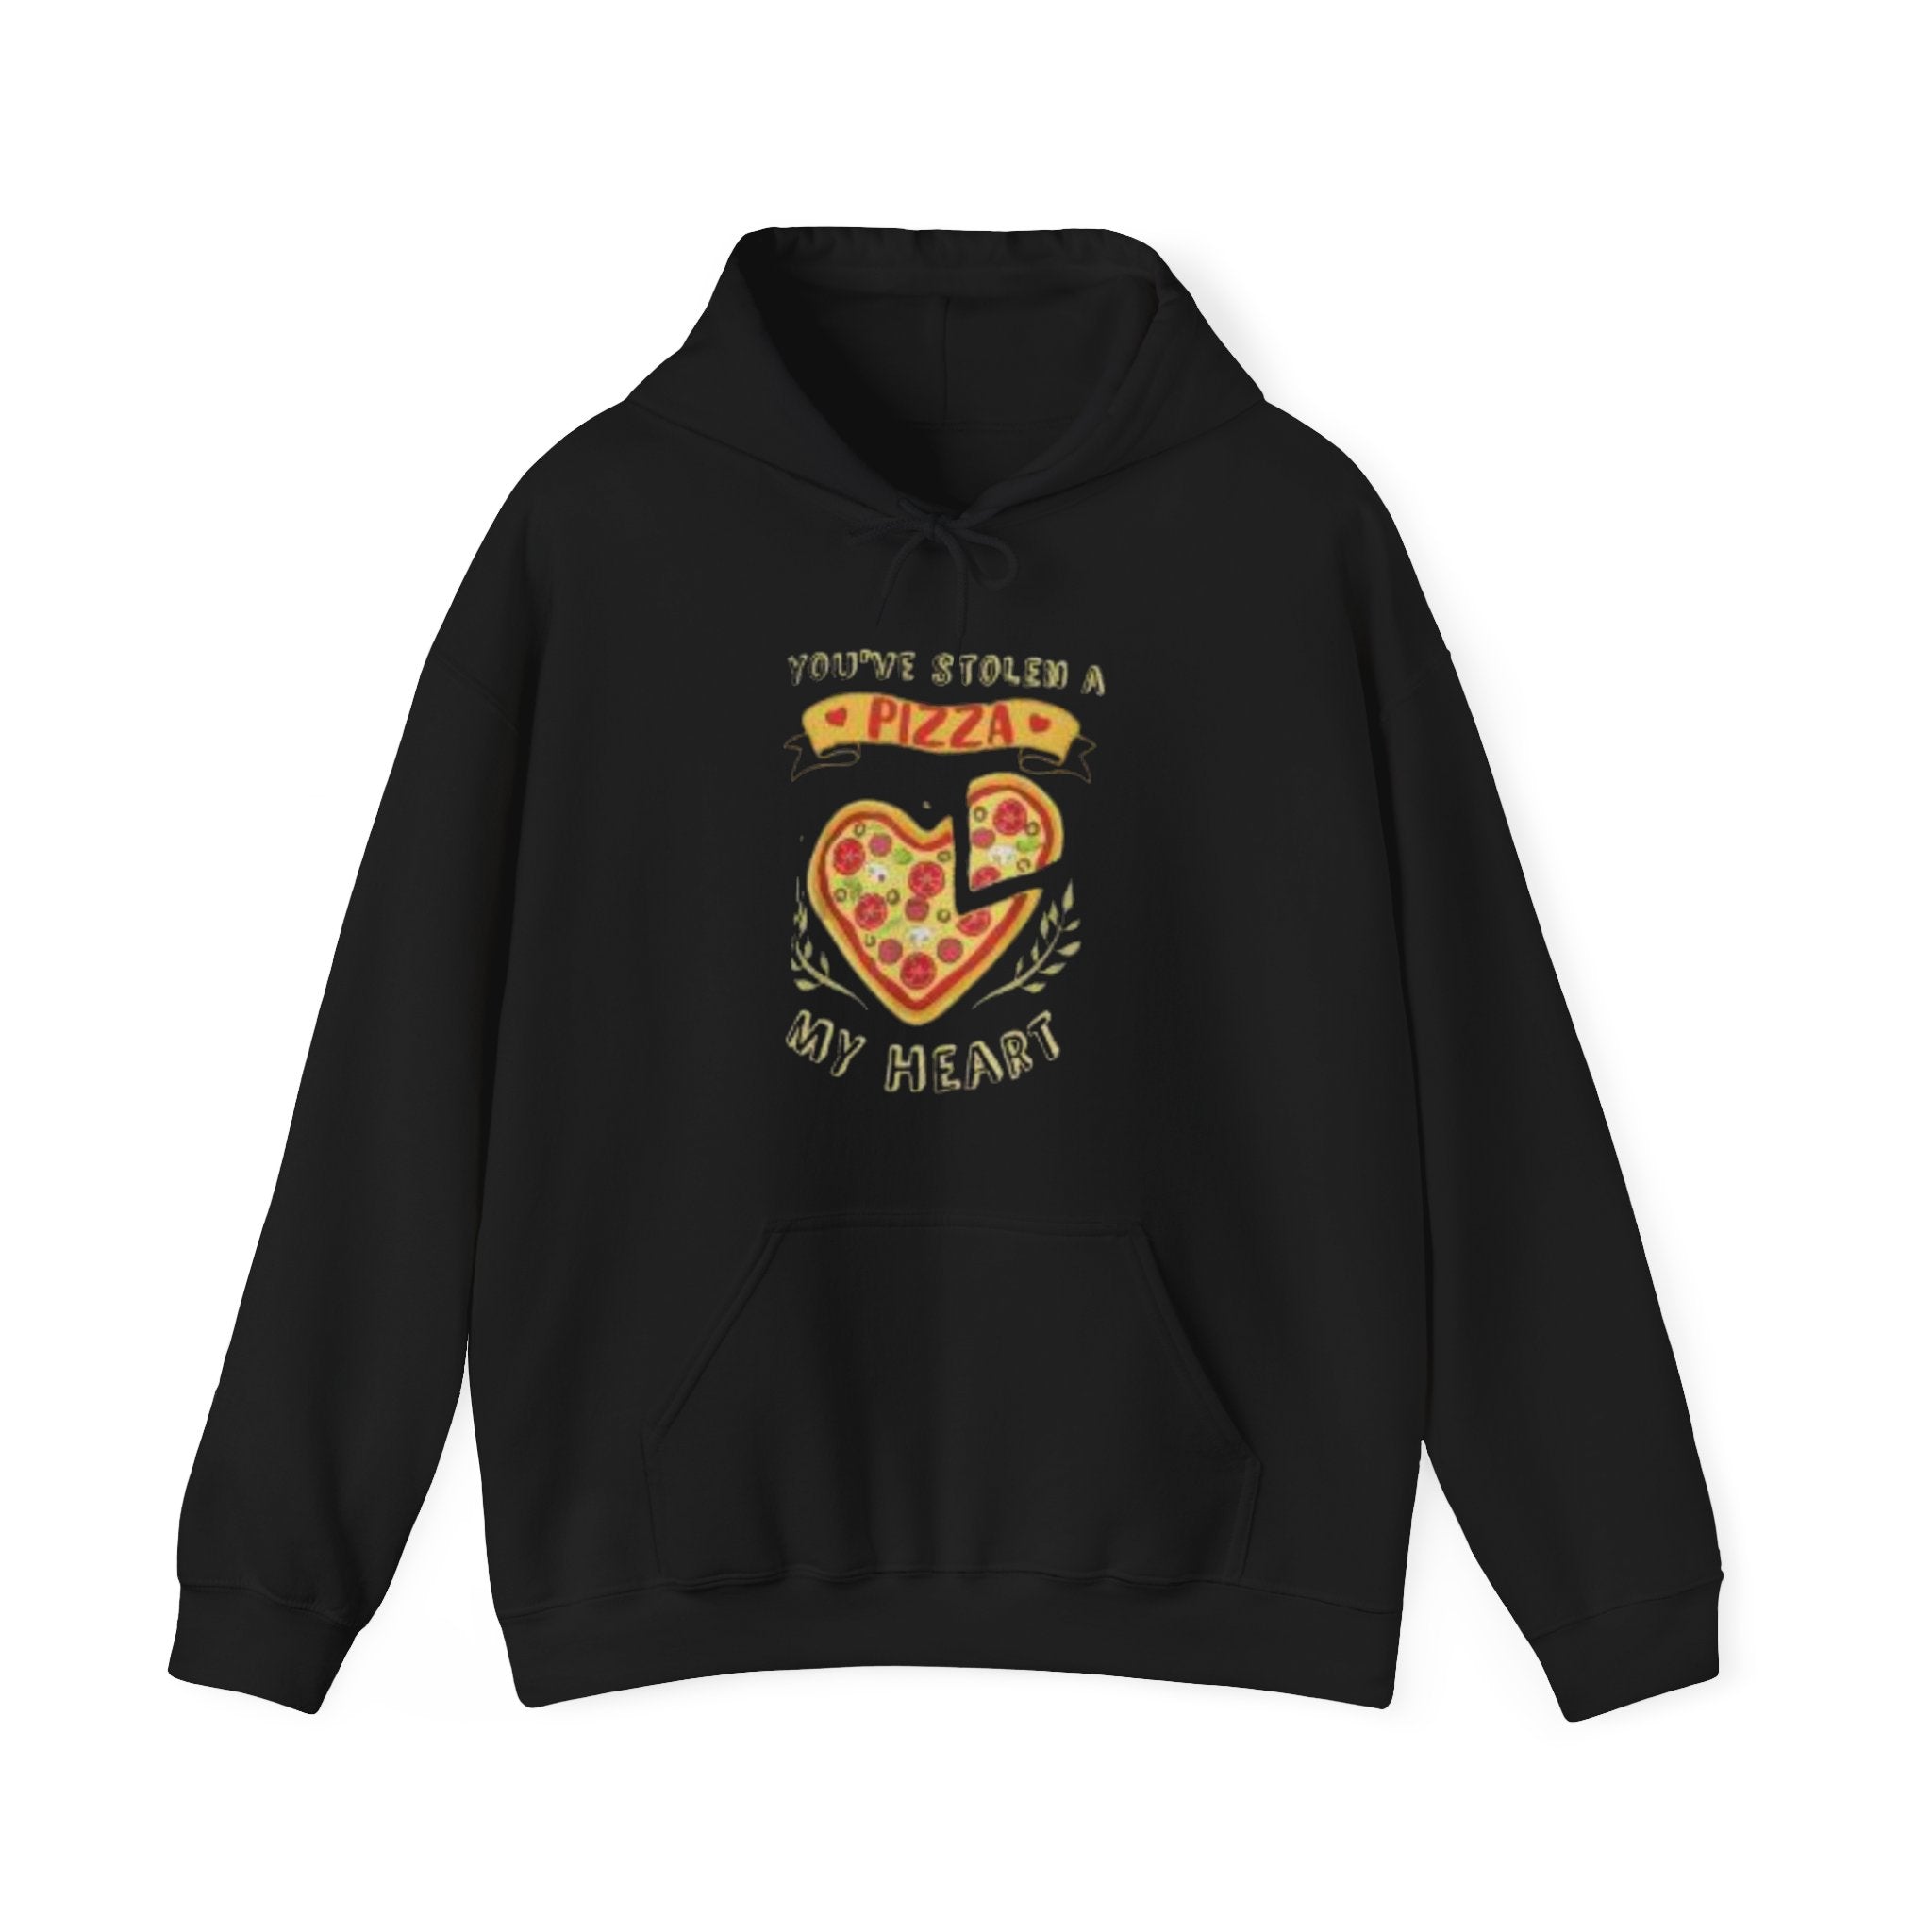 You've Stolen A Pizza My Heart Hoodie